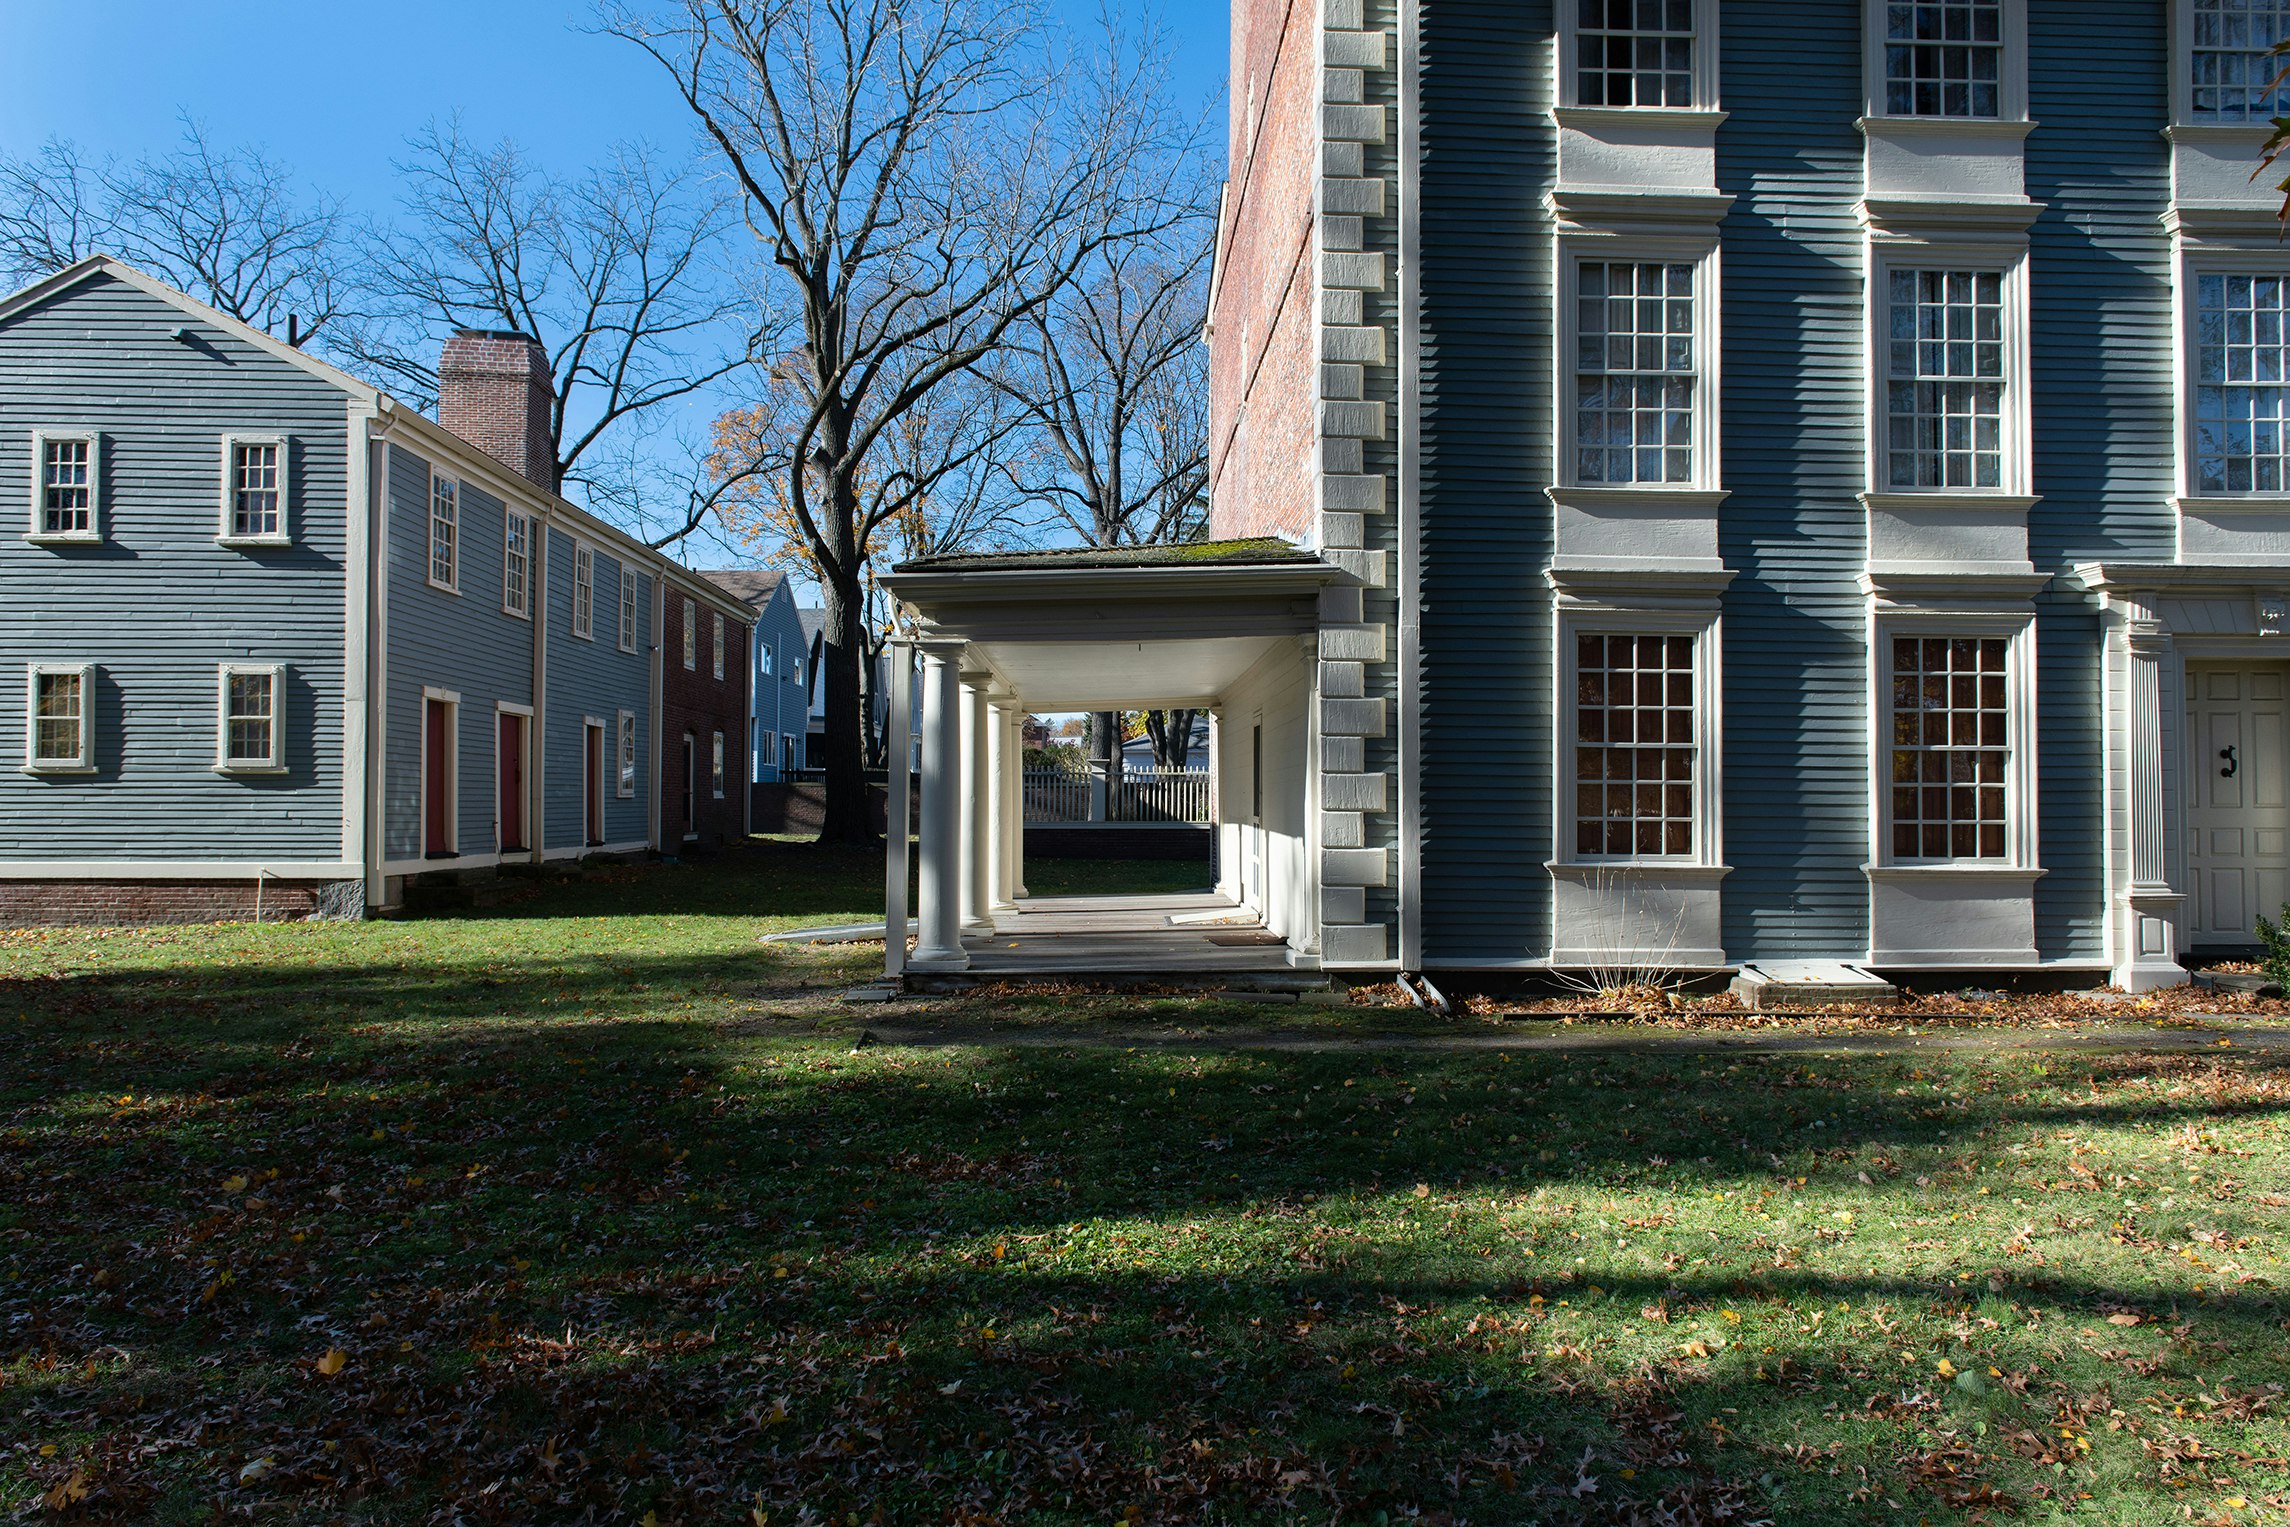 Exterior of out kitchen building adjacent to mansion at Royall House and Slave Quarters in modern day